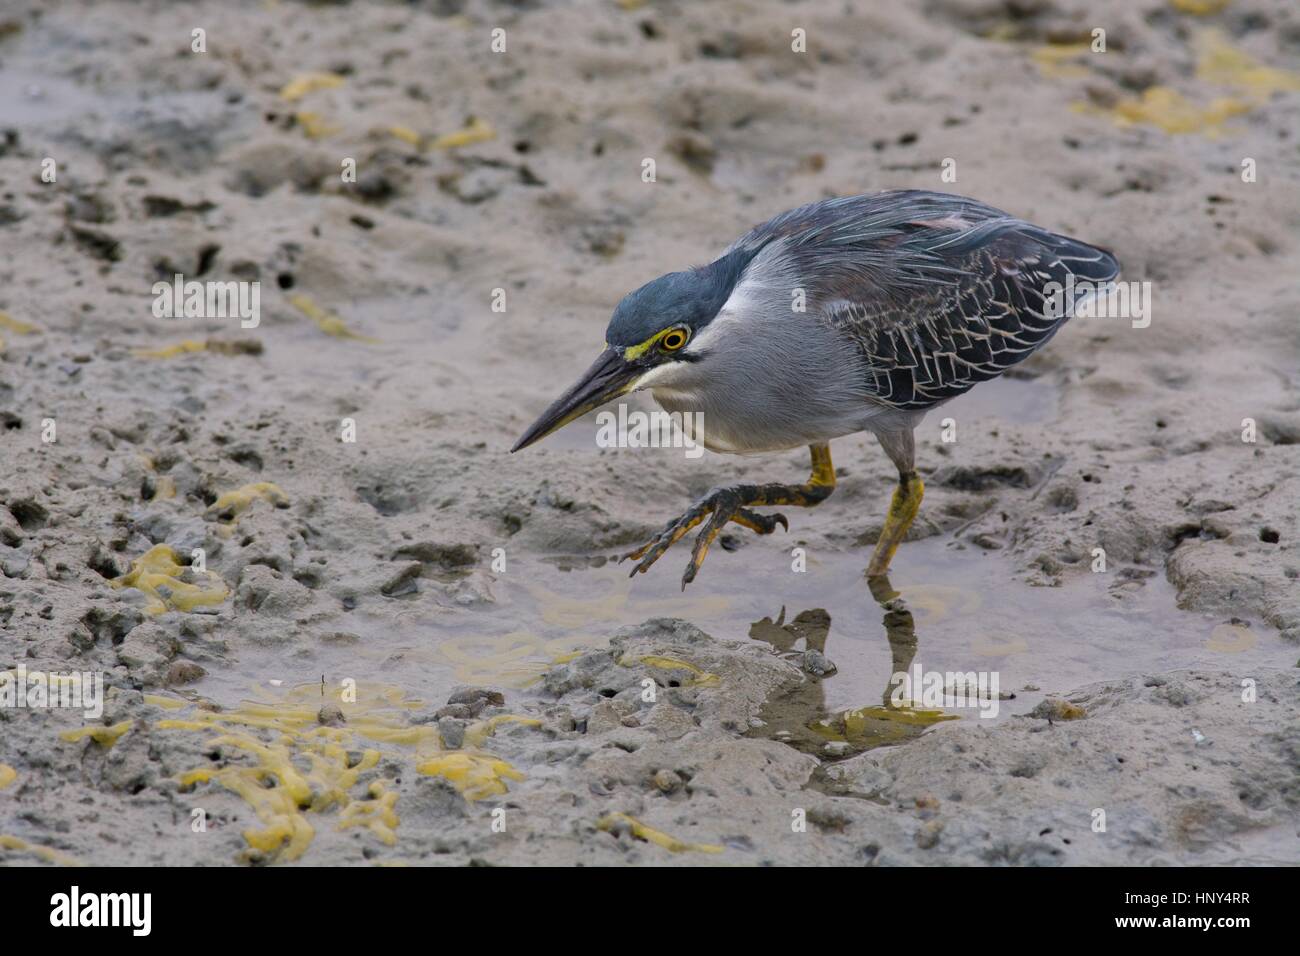 Striated (little) heron - Butorides striata - walking in soft mud at low tide. Unusual angle of view showing crouching posture and large feet. Stock Photo